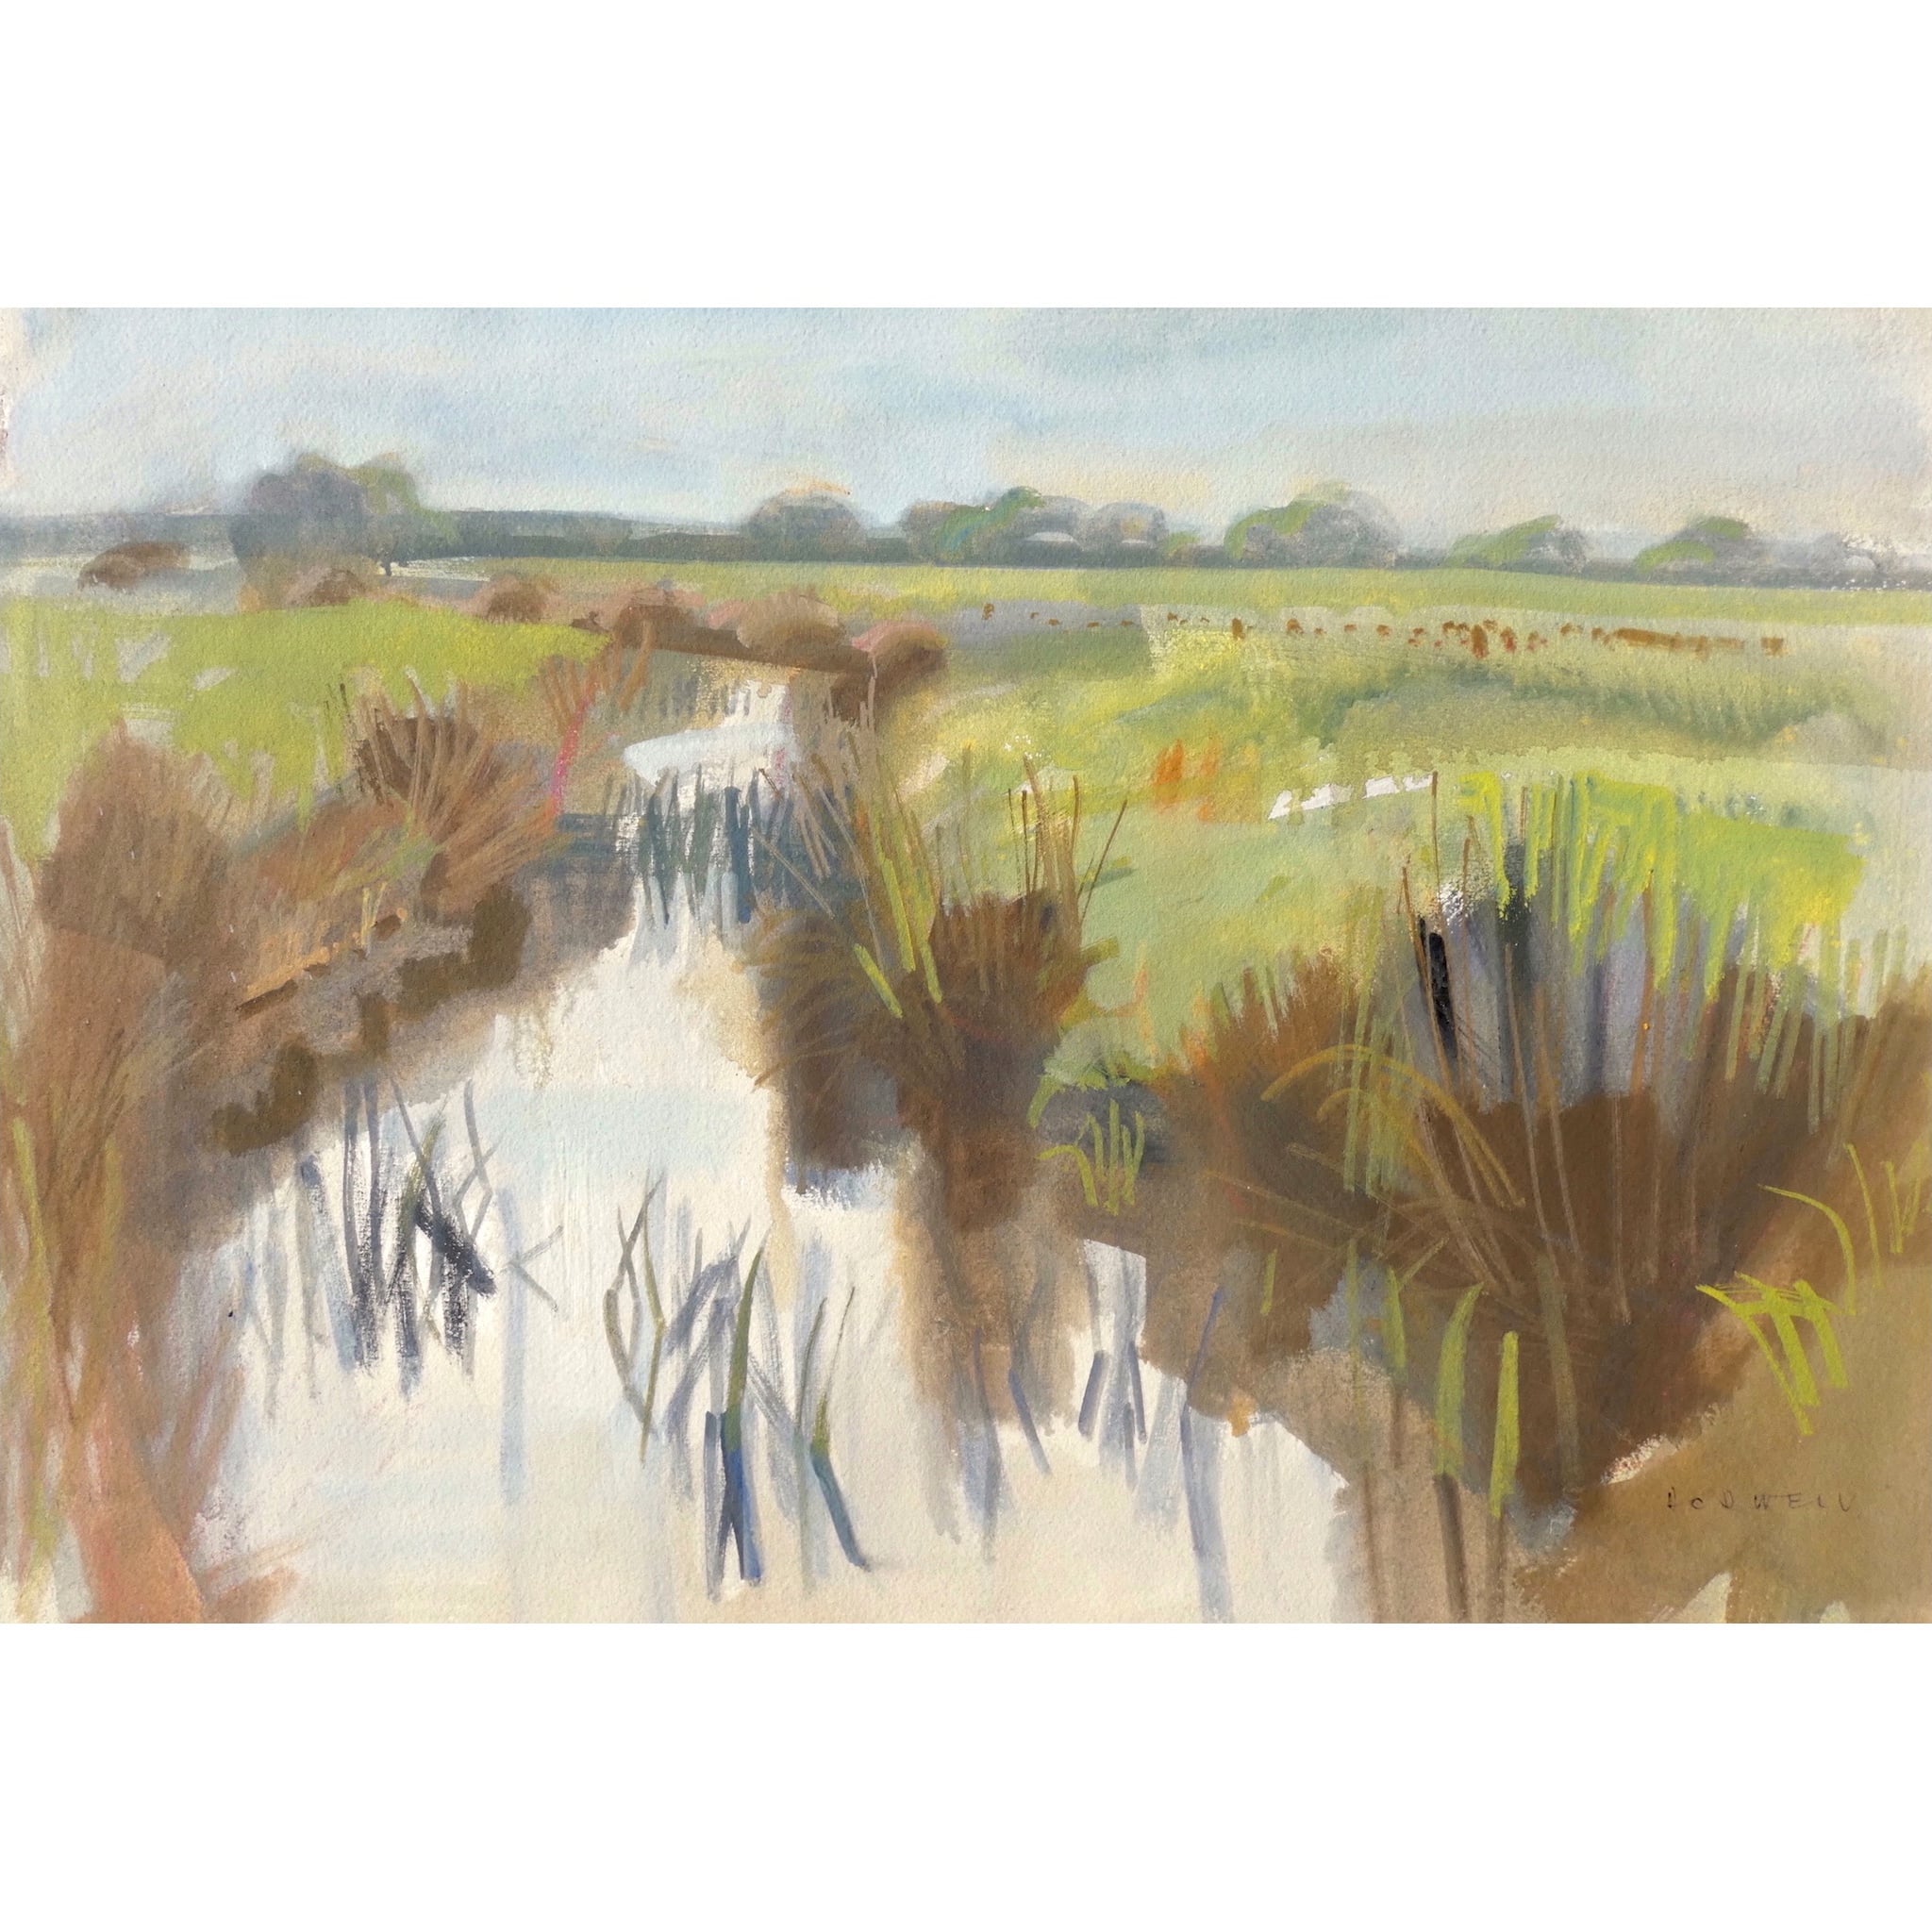 Painting of wetland by artist Sam Dodwell